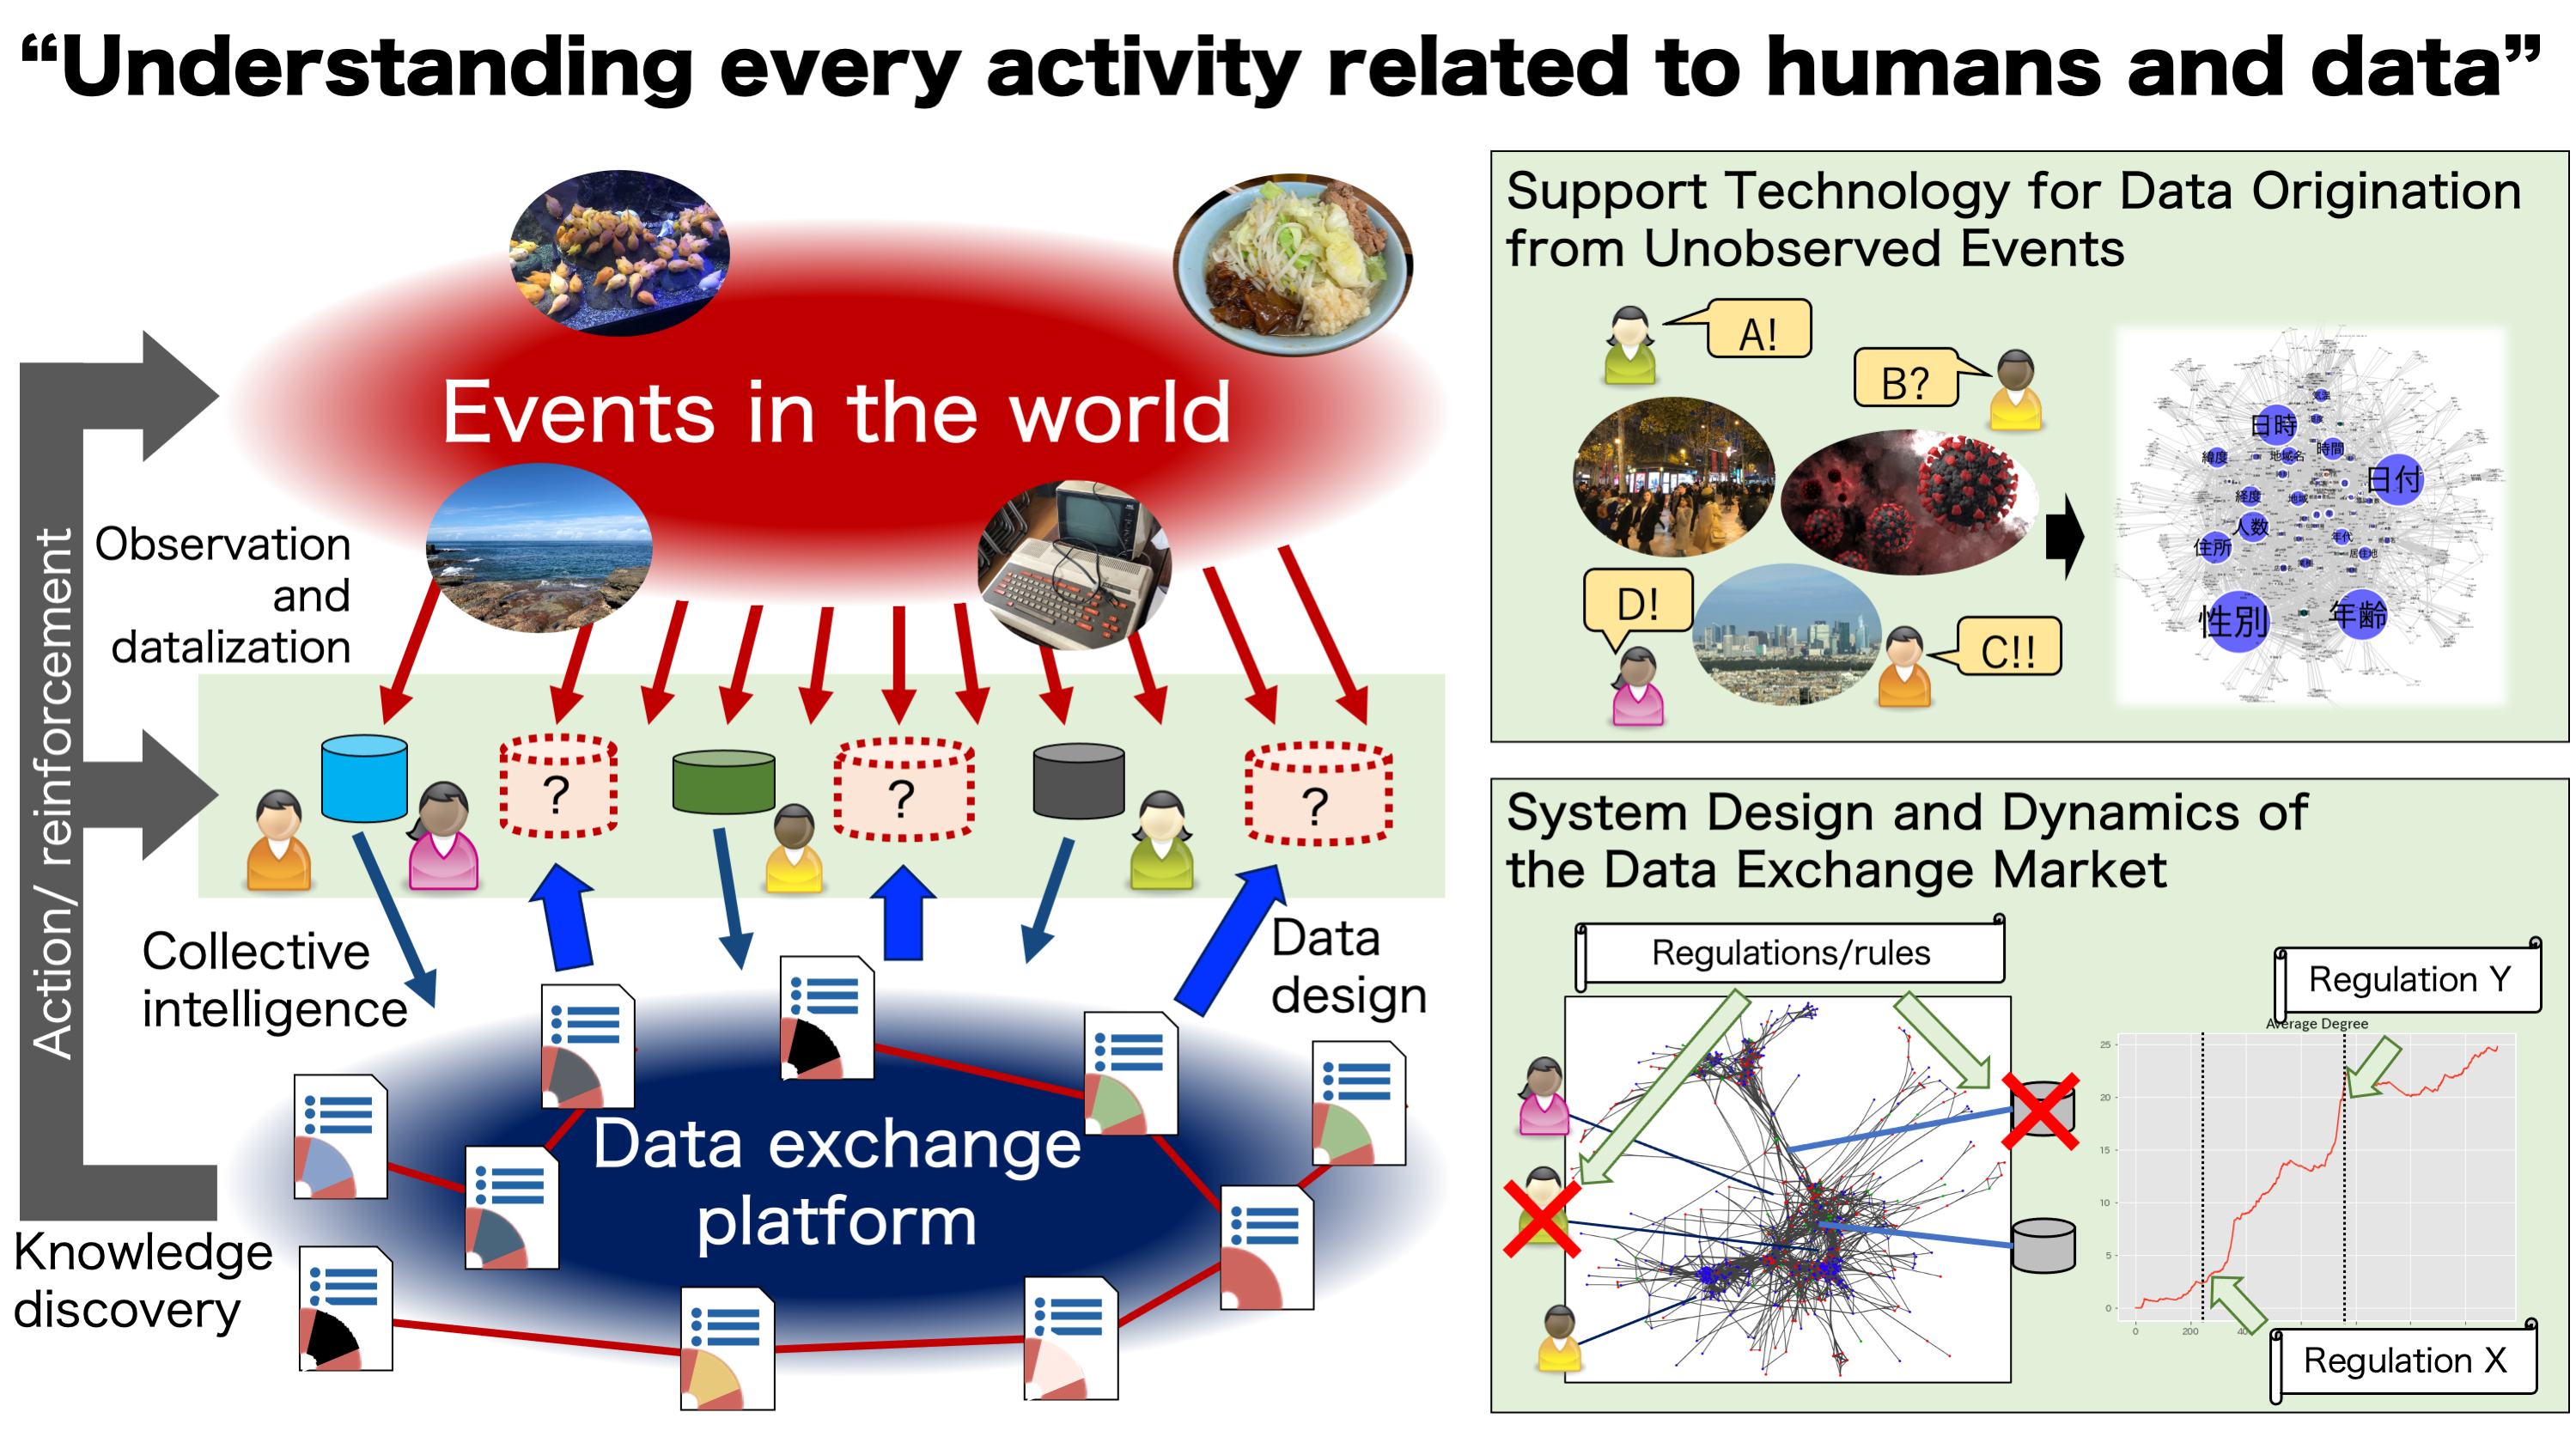 Unlocking every activity related to humans and data